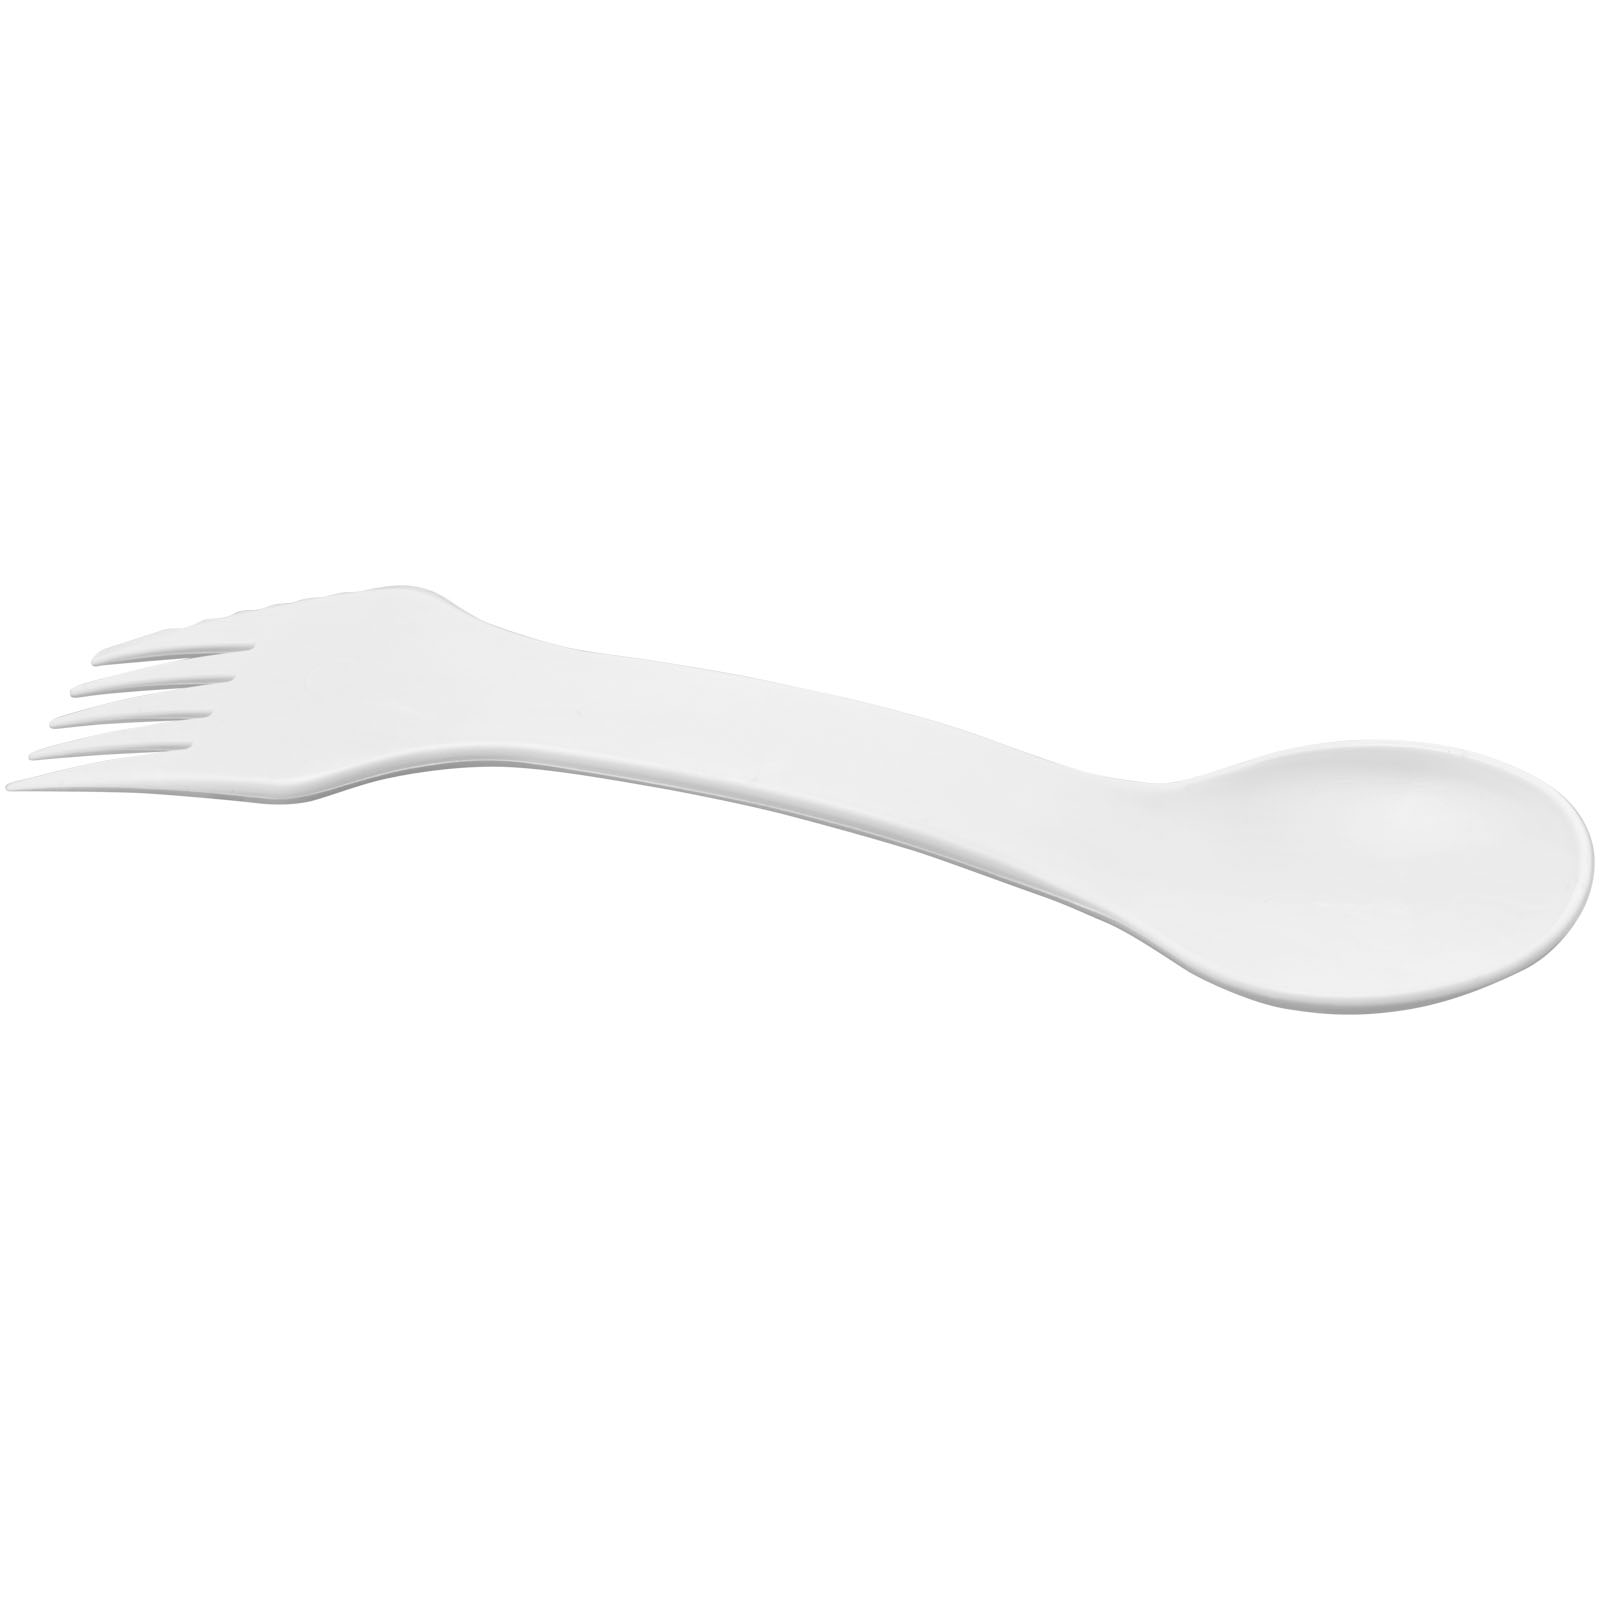 Advertising Picnic Accessories - Epsy Pure 3-in-1 spoon, fork and knife